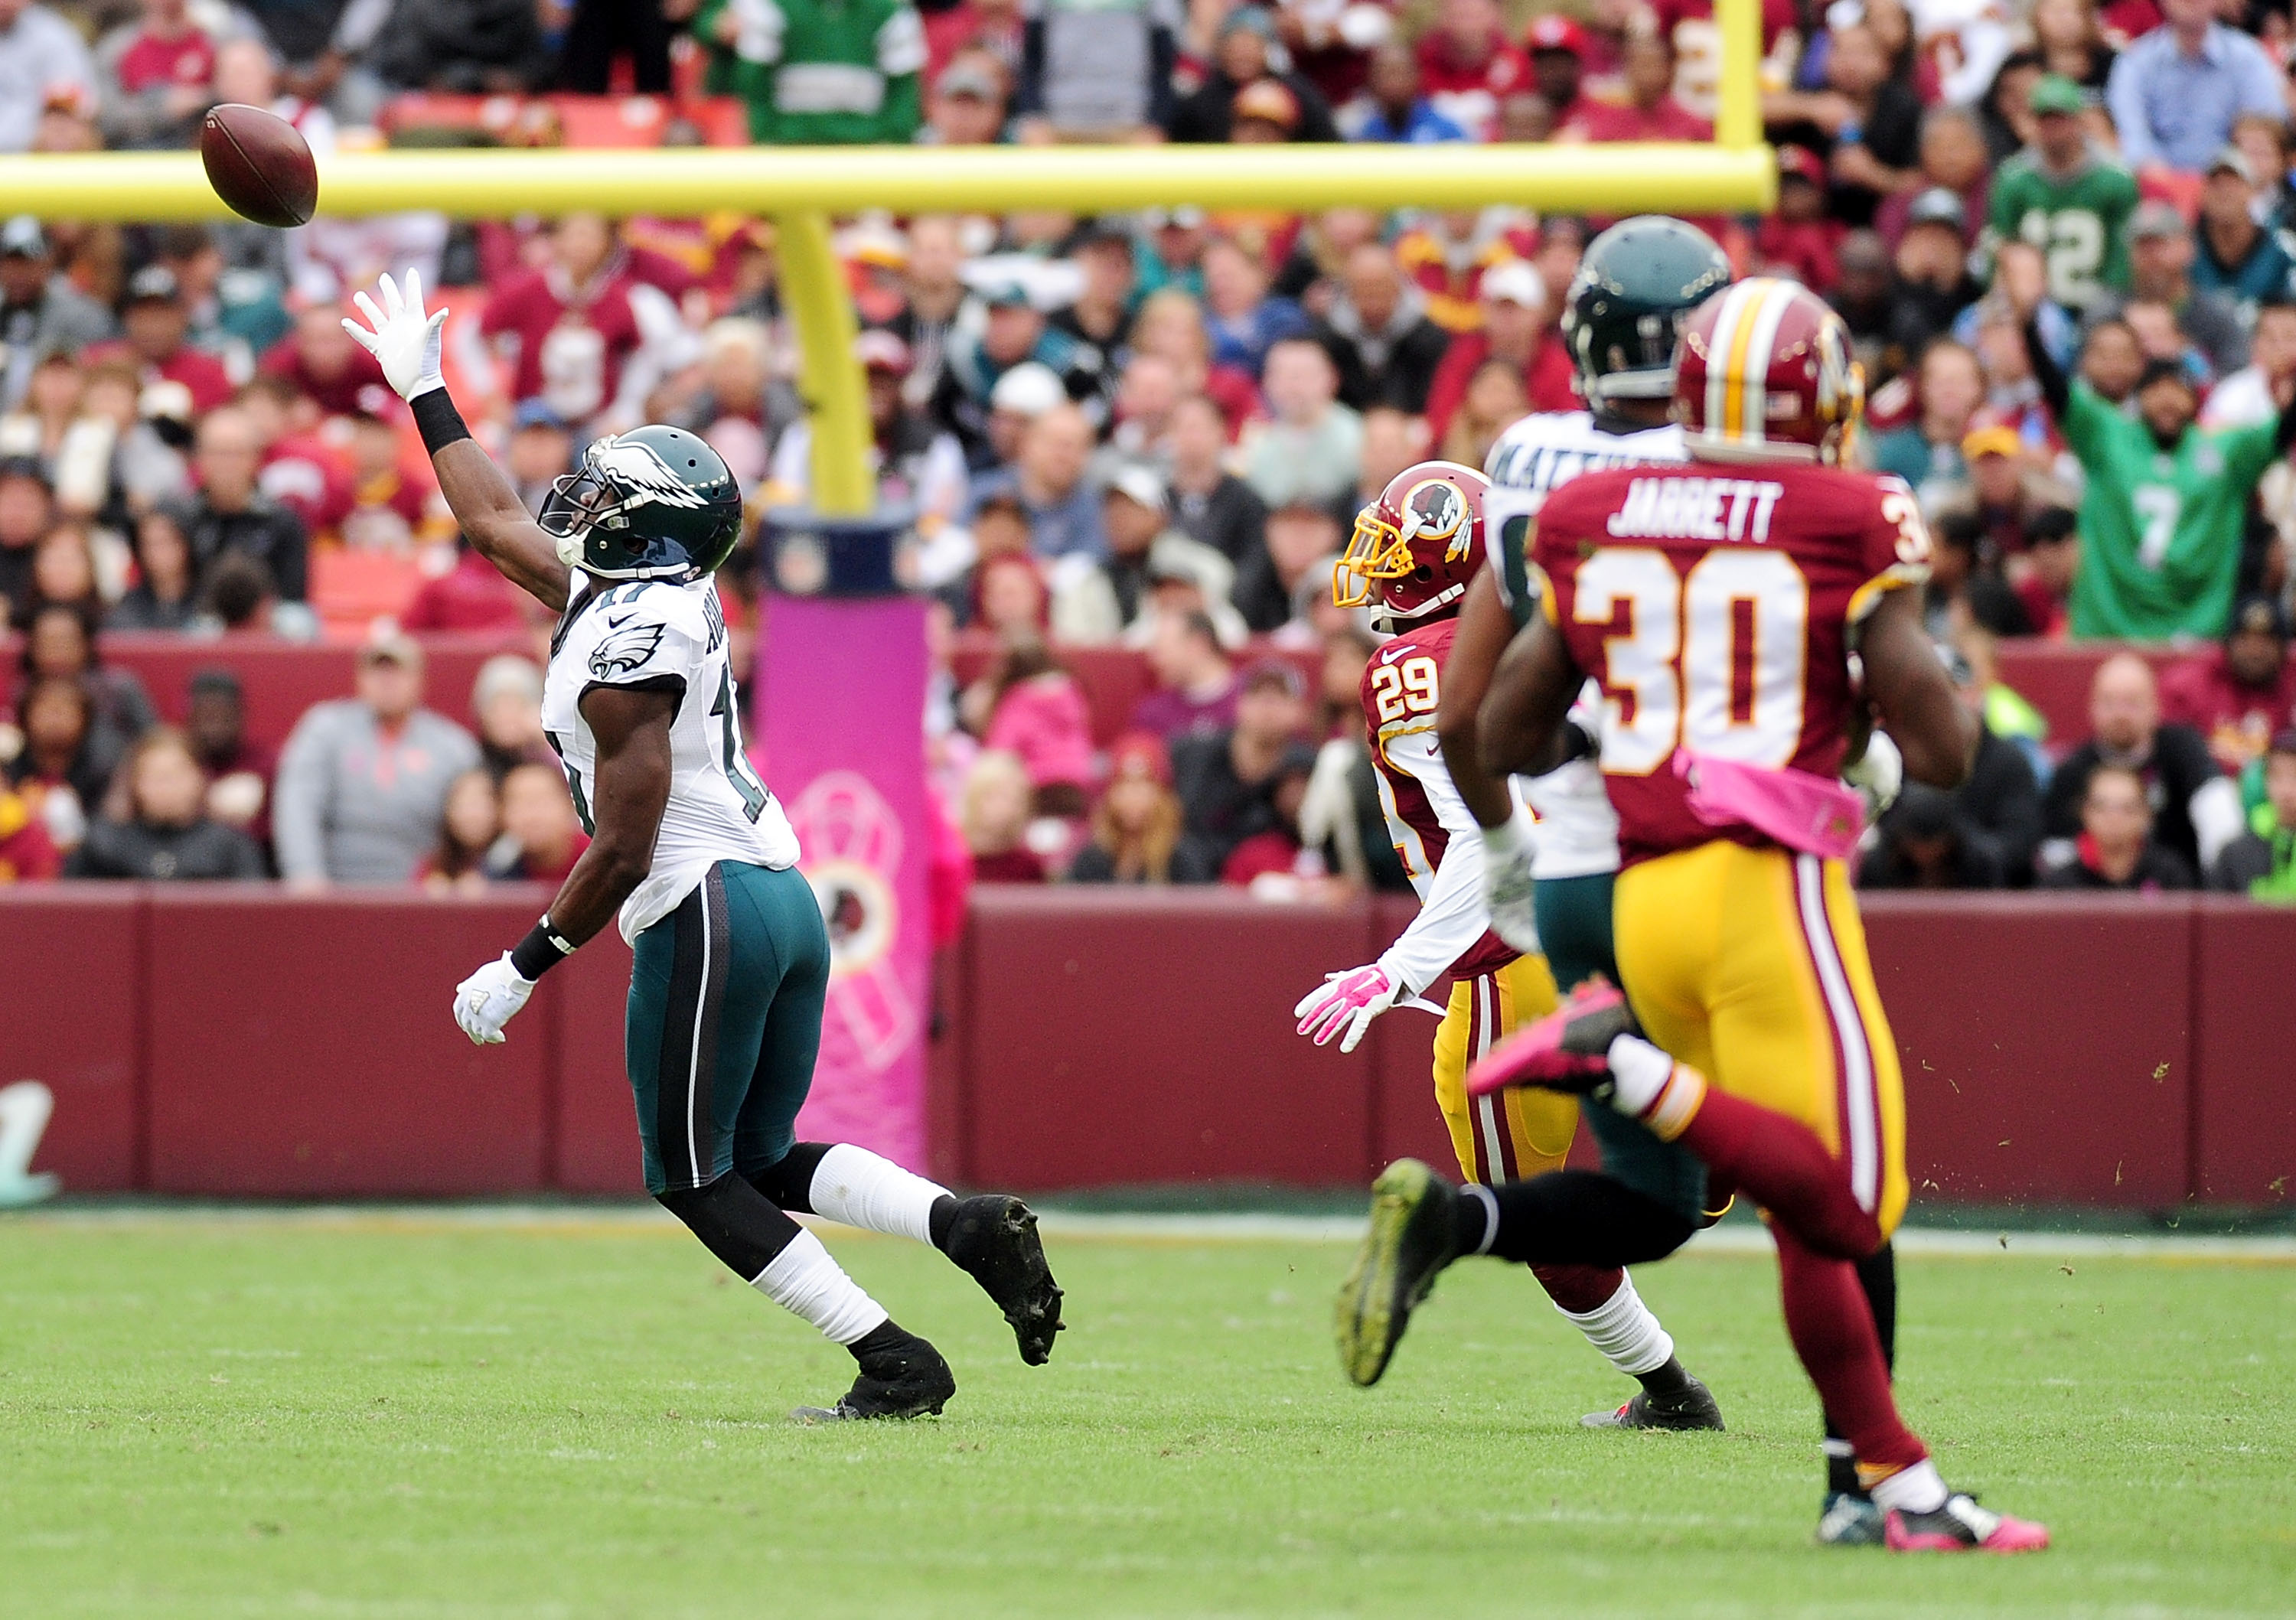 LANDOVER, MD - OCTOBER 04: Nelson Agholor #17 of the Philadelphia Eagles catches a pass one-handed in the second quarter against the Washington Redskins at FedExField on October 4, 2015 in Landover, Maryland. (Photo by Evan Habeeb/Getty Images)